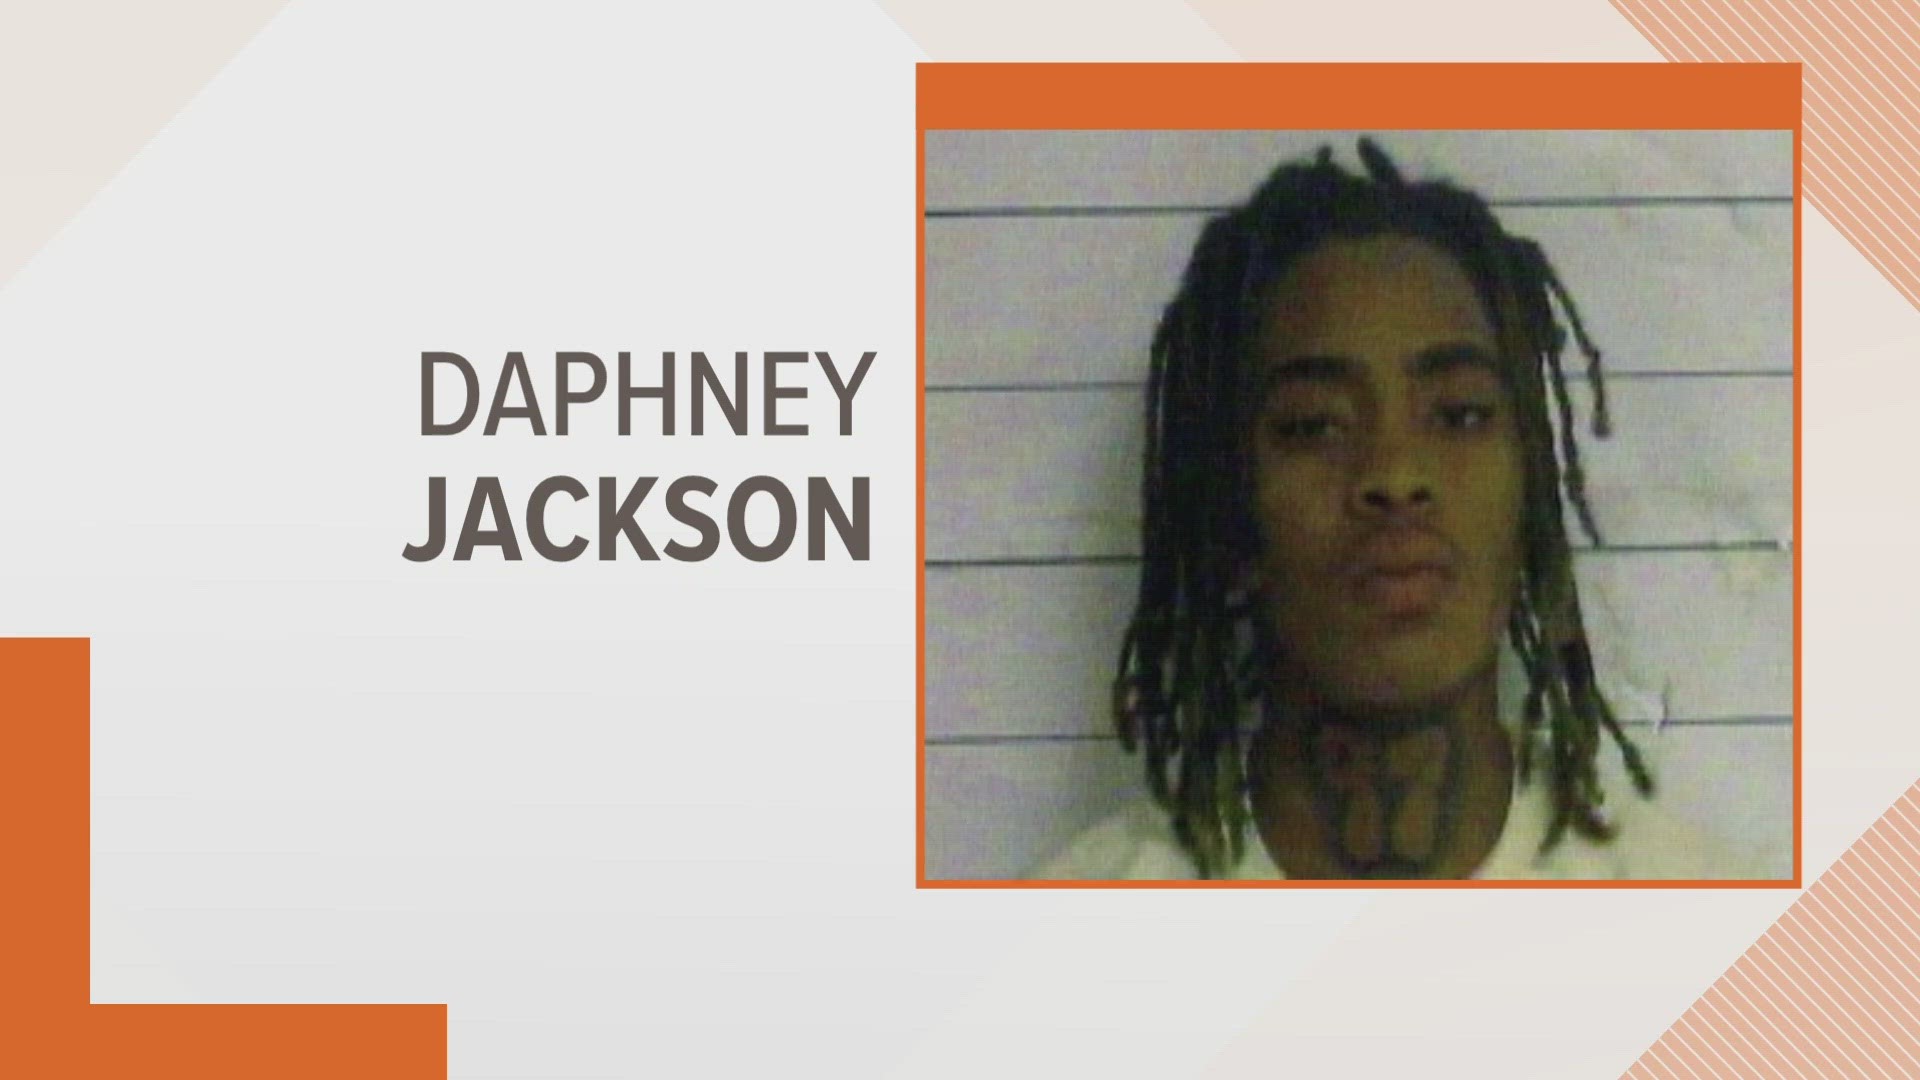 According to NOLA.com, the lesser charge of manslaughter was reached on Friday in the trial of Daphney Jackson, 25, accused of killing bartender Spencer Hudson, 46.